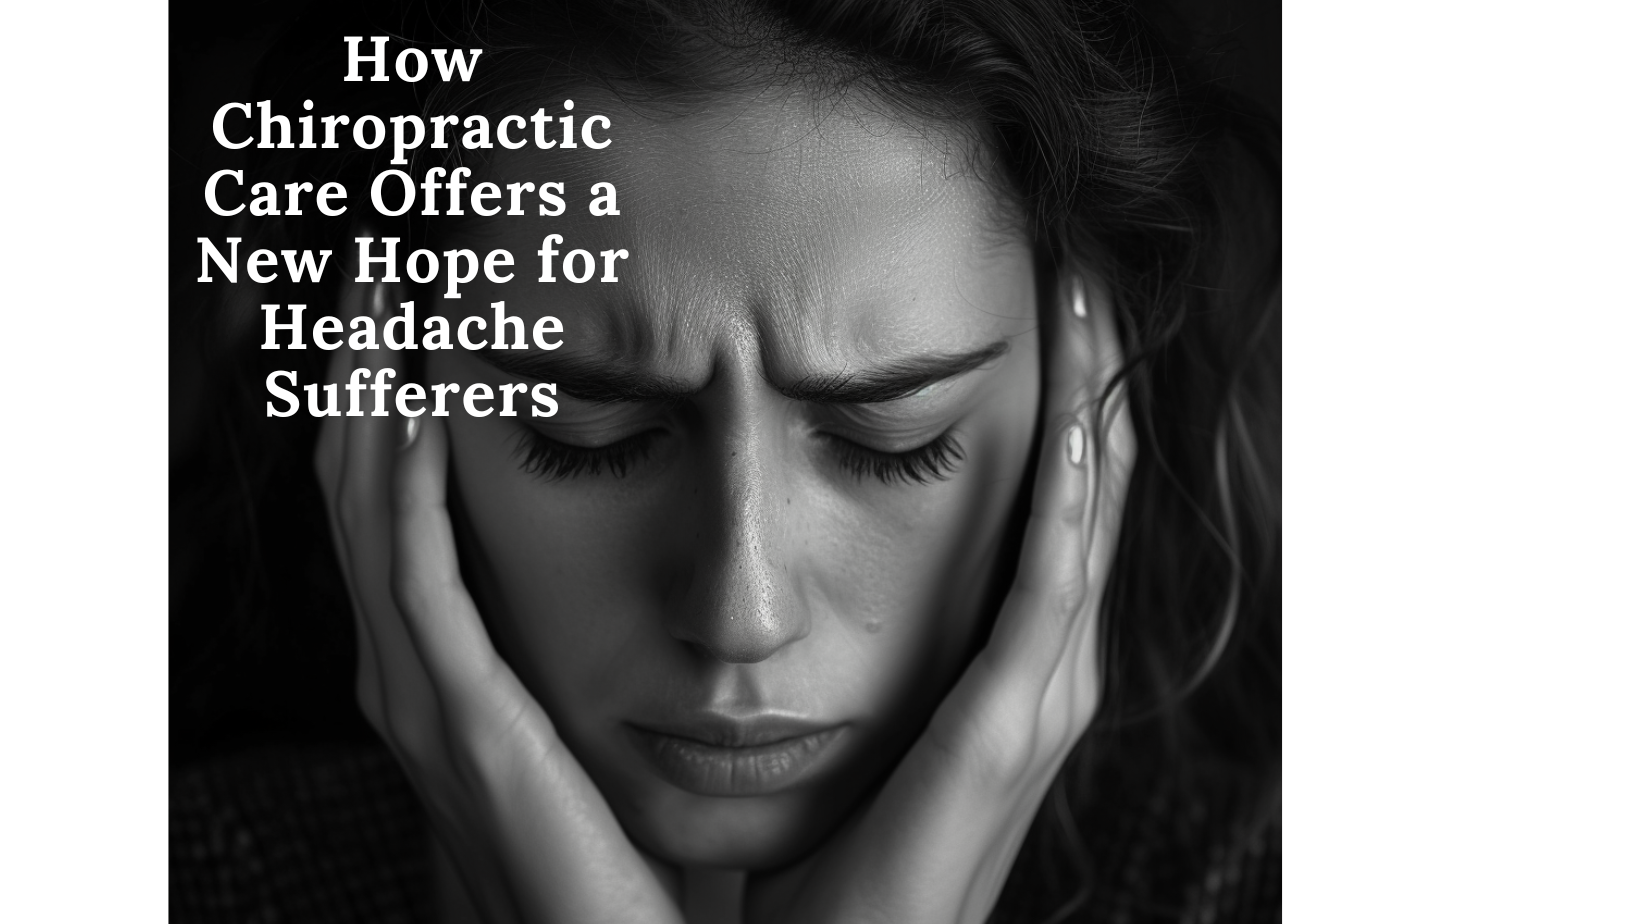 How Chiropractic Care Offers a New Hope for Headache Sufferers